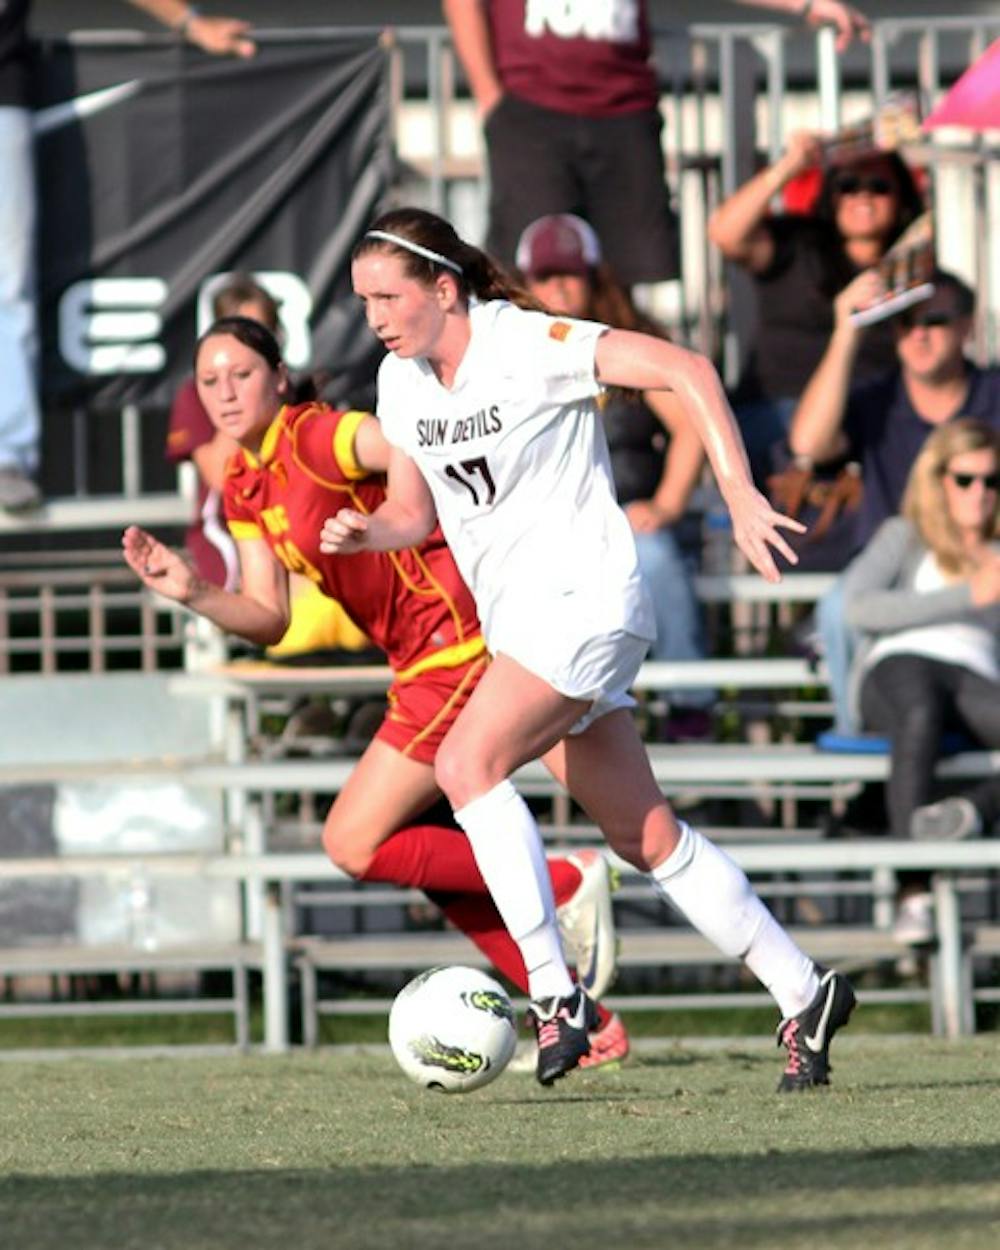 FINAL HOMESTAND: ASU senior defender Kate Sangster moves the ball up field during ASU’s overtime loss to USC last weekend. Sangster will play her final home game as a Sun Devil on Sunday. (Photo courtesy of Steve Rodriguez)